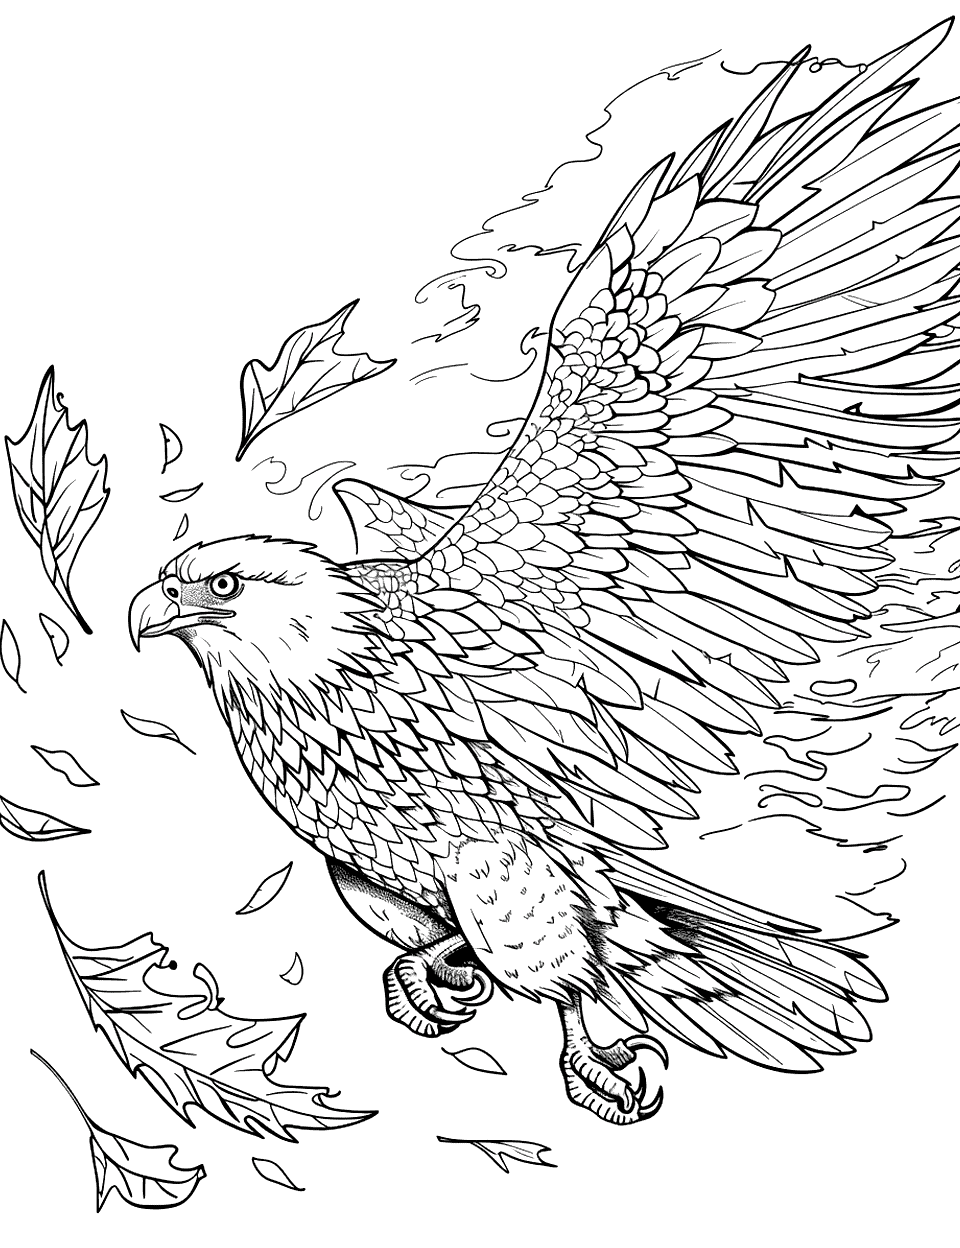 Playful Eagle Chasing Leaves Coloring Page - A juvenile eagle playfully chases falling leaves on a windy day, capturing the essence of autumn.